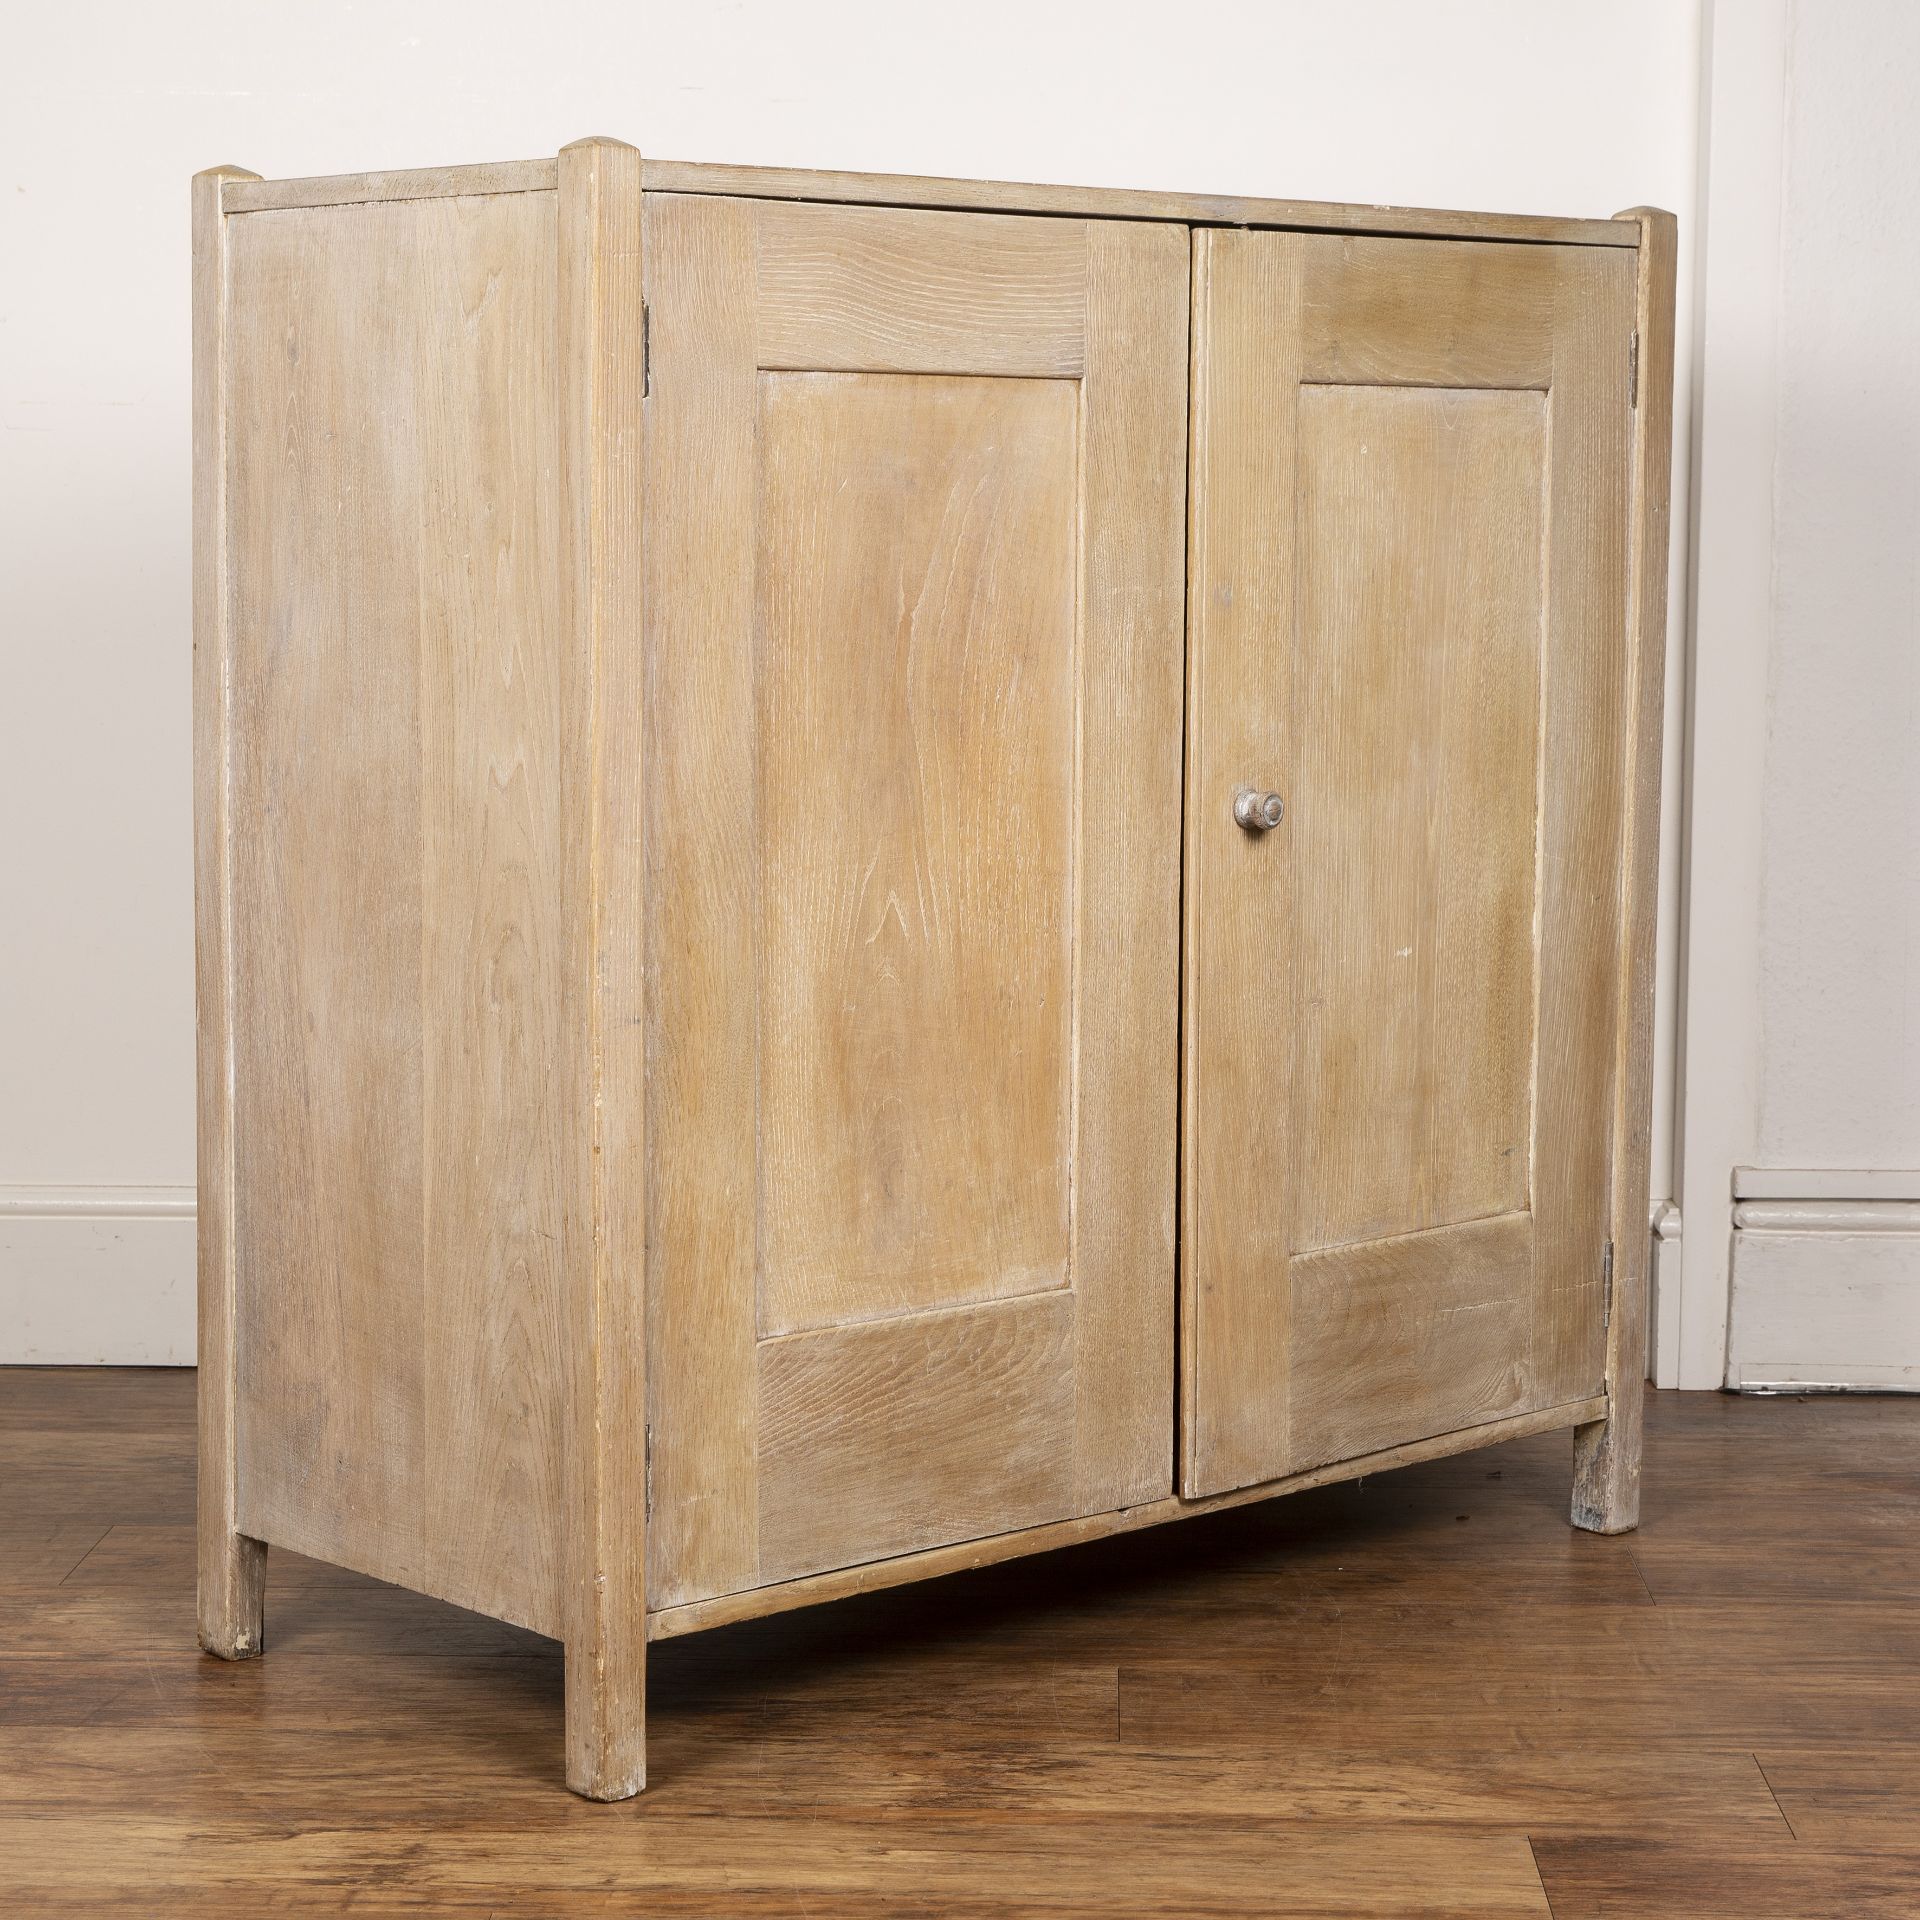 Heals cupboard limed oak, design number '348', with two panelled doors enclosing shelves, raised - Image 3 of 5